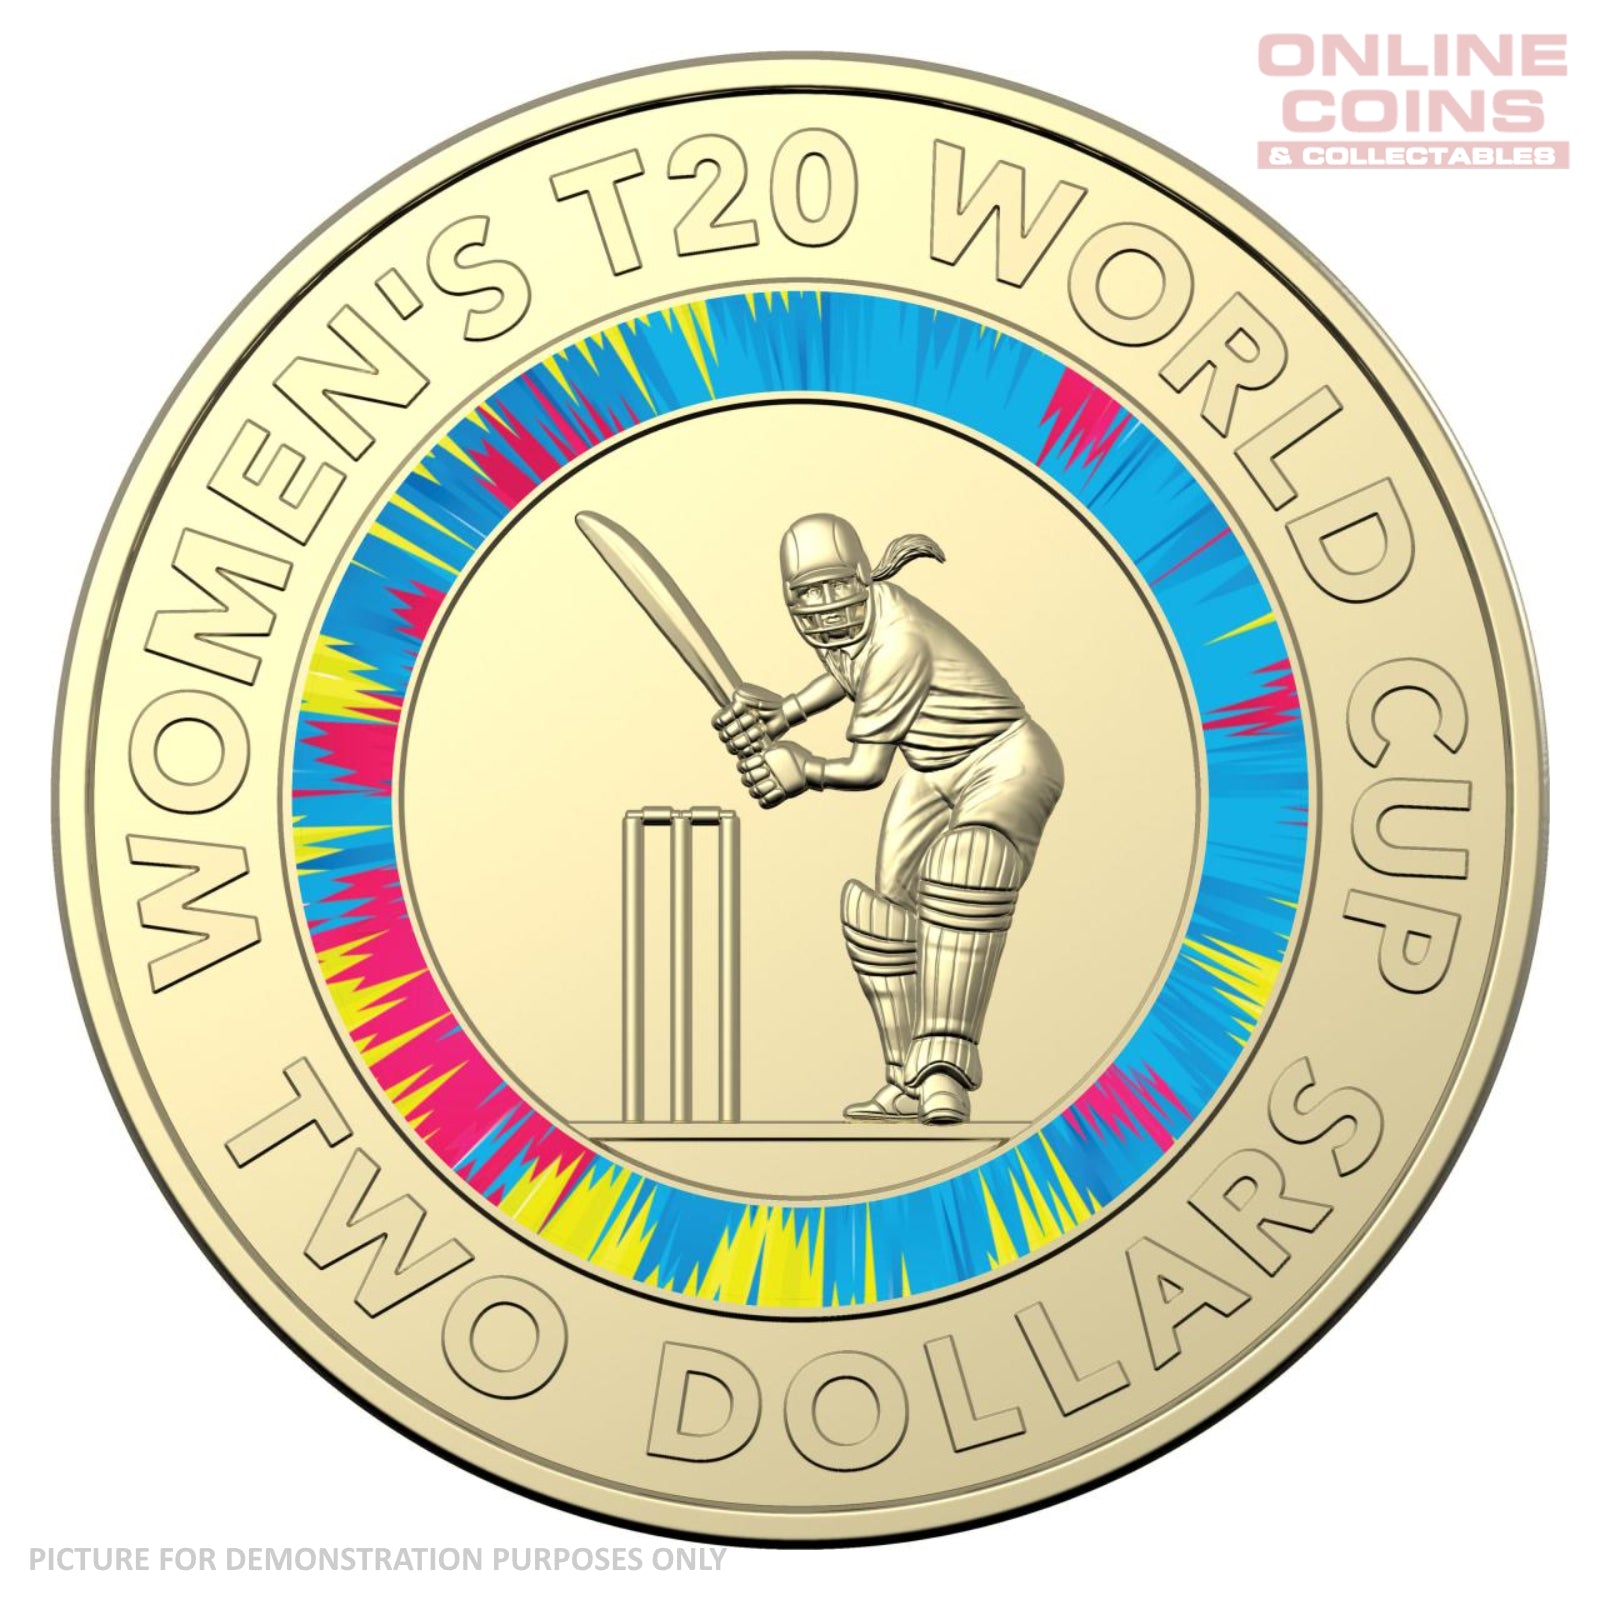 2020 RAM $2 AlBr Coloured Circulated Loose Coin -  ICC Women’s T20 World Cup